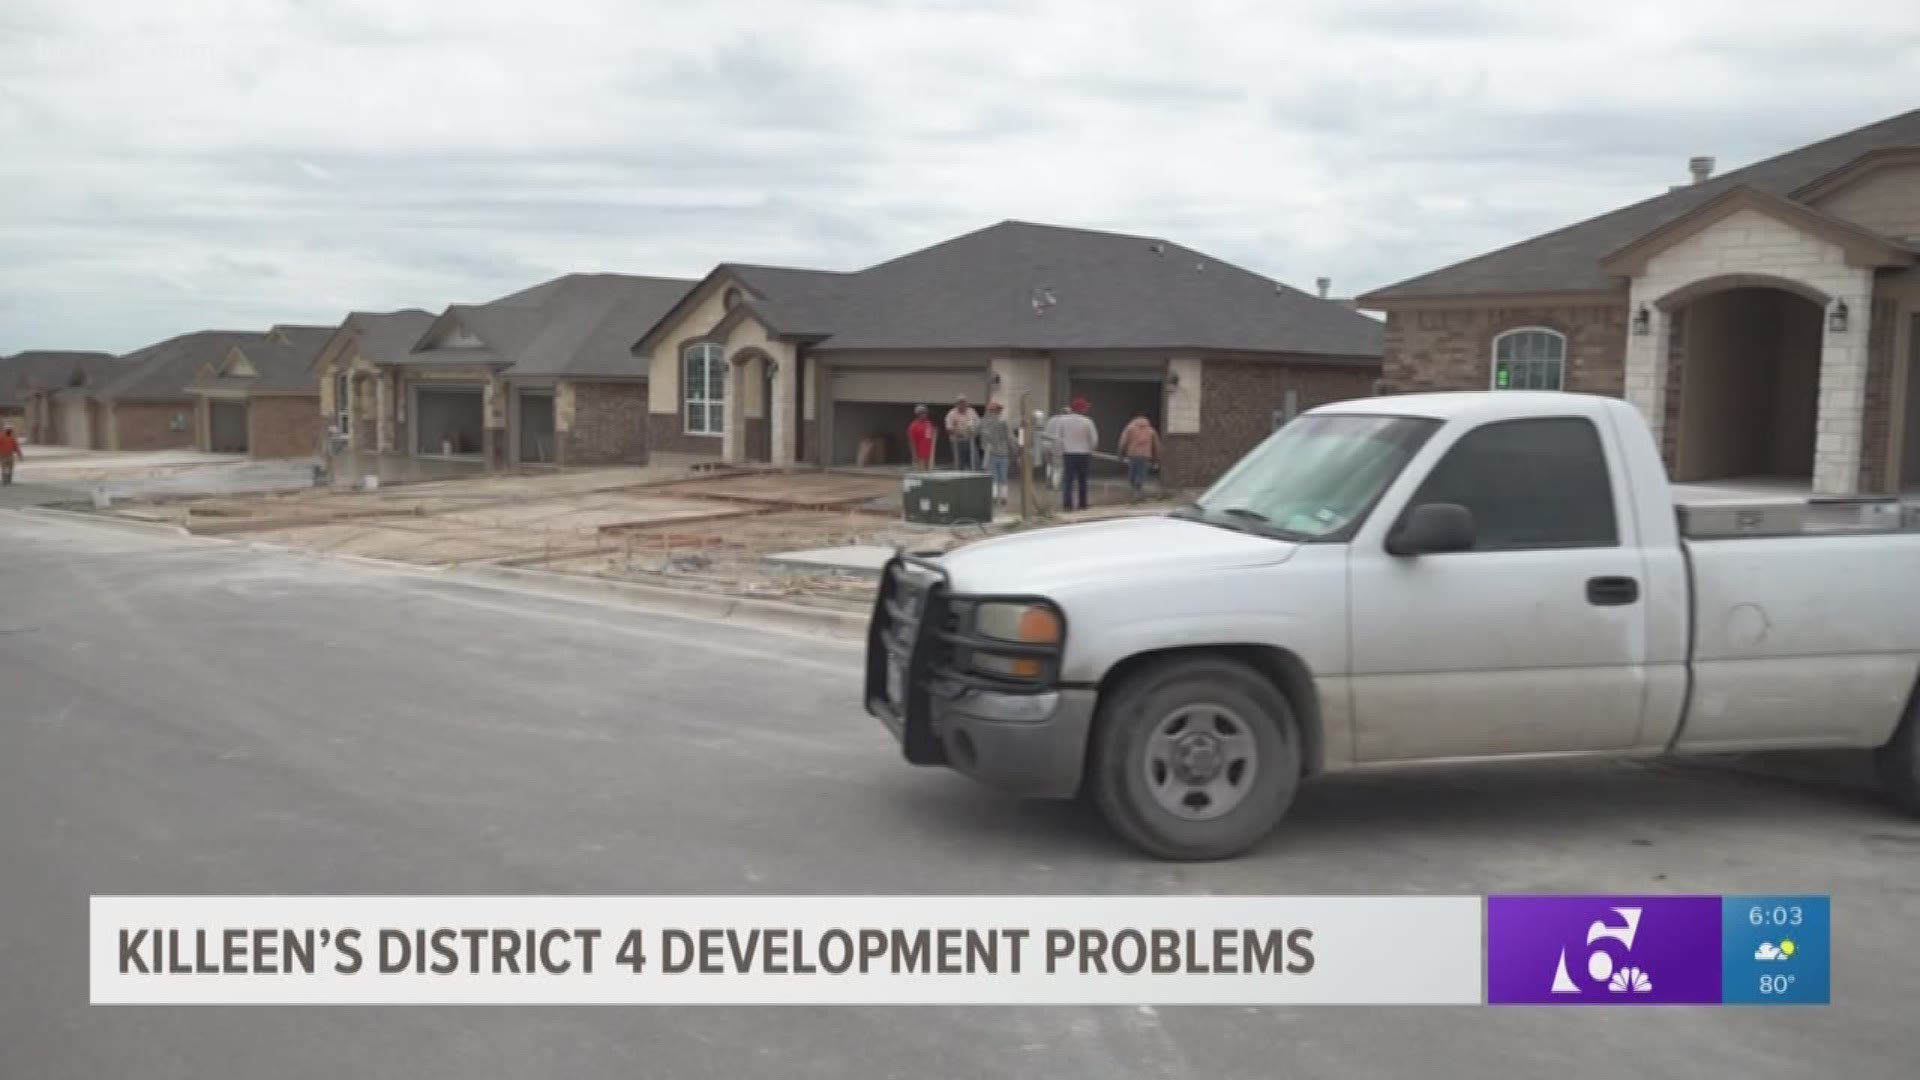 Parts of Killeen's District 4 have seen multiple development issues over the last year, including a subdivision having only one road in and out for normal traffic, internet issues and annexation concerns.